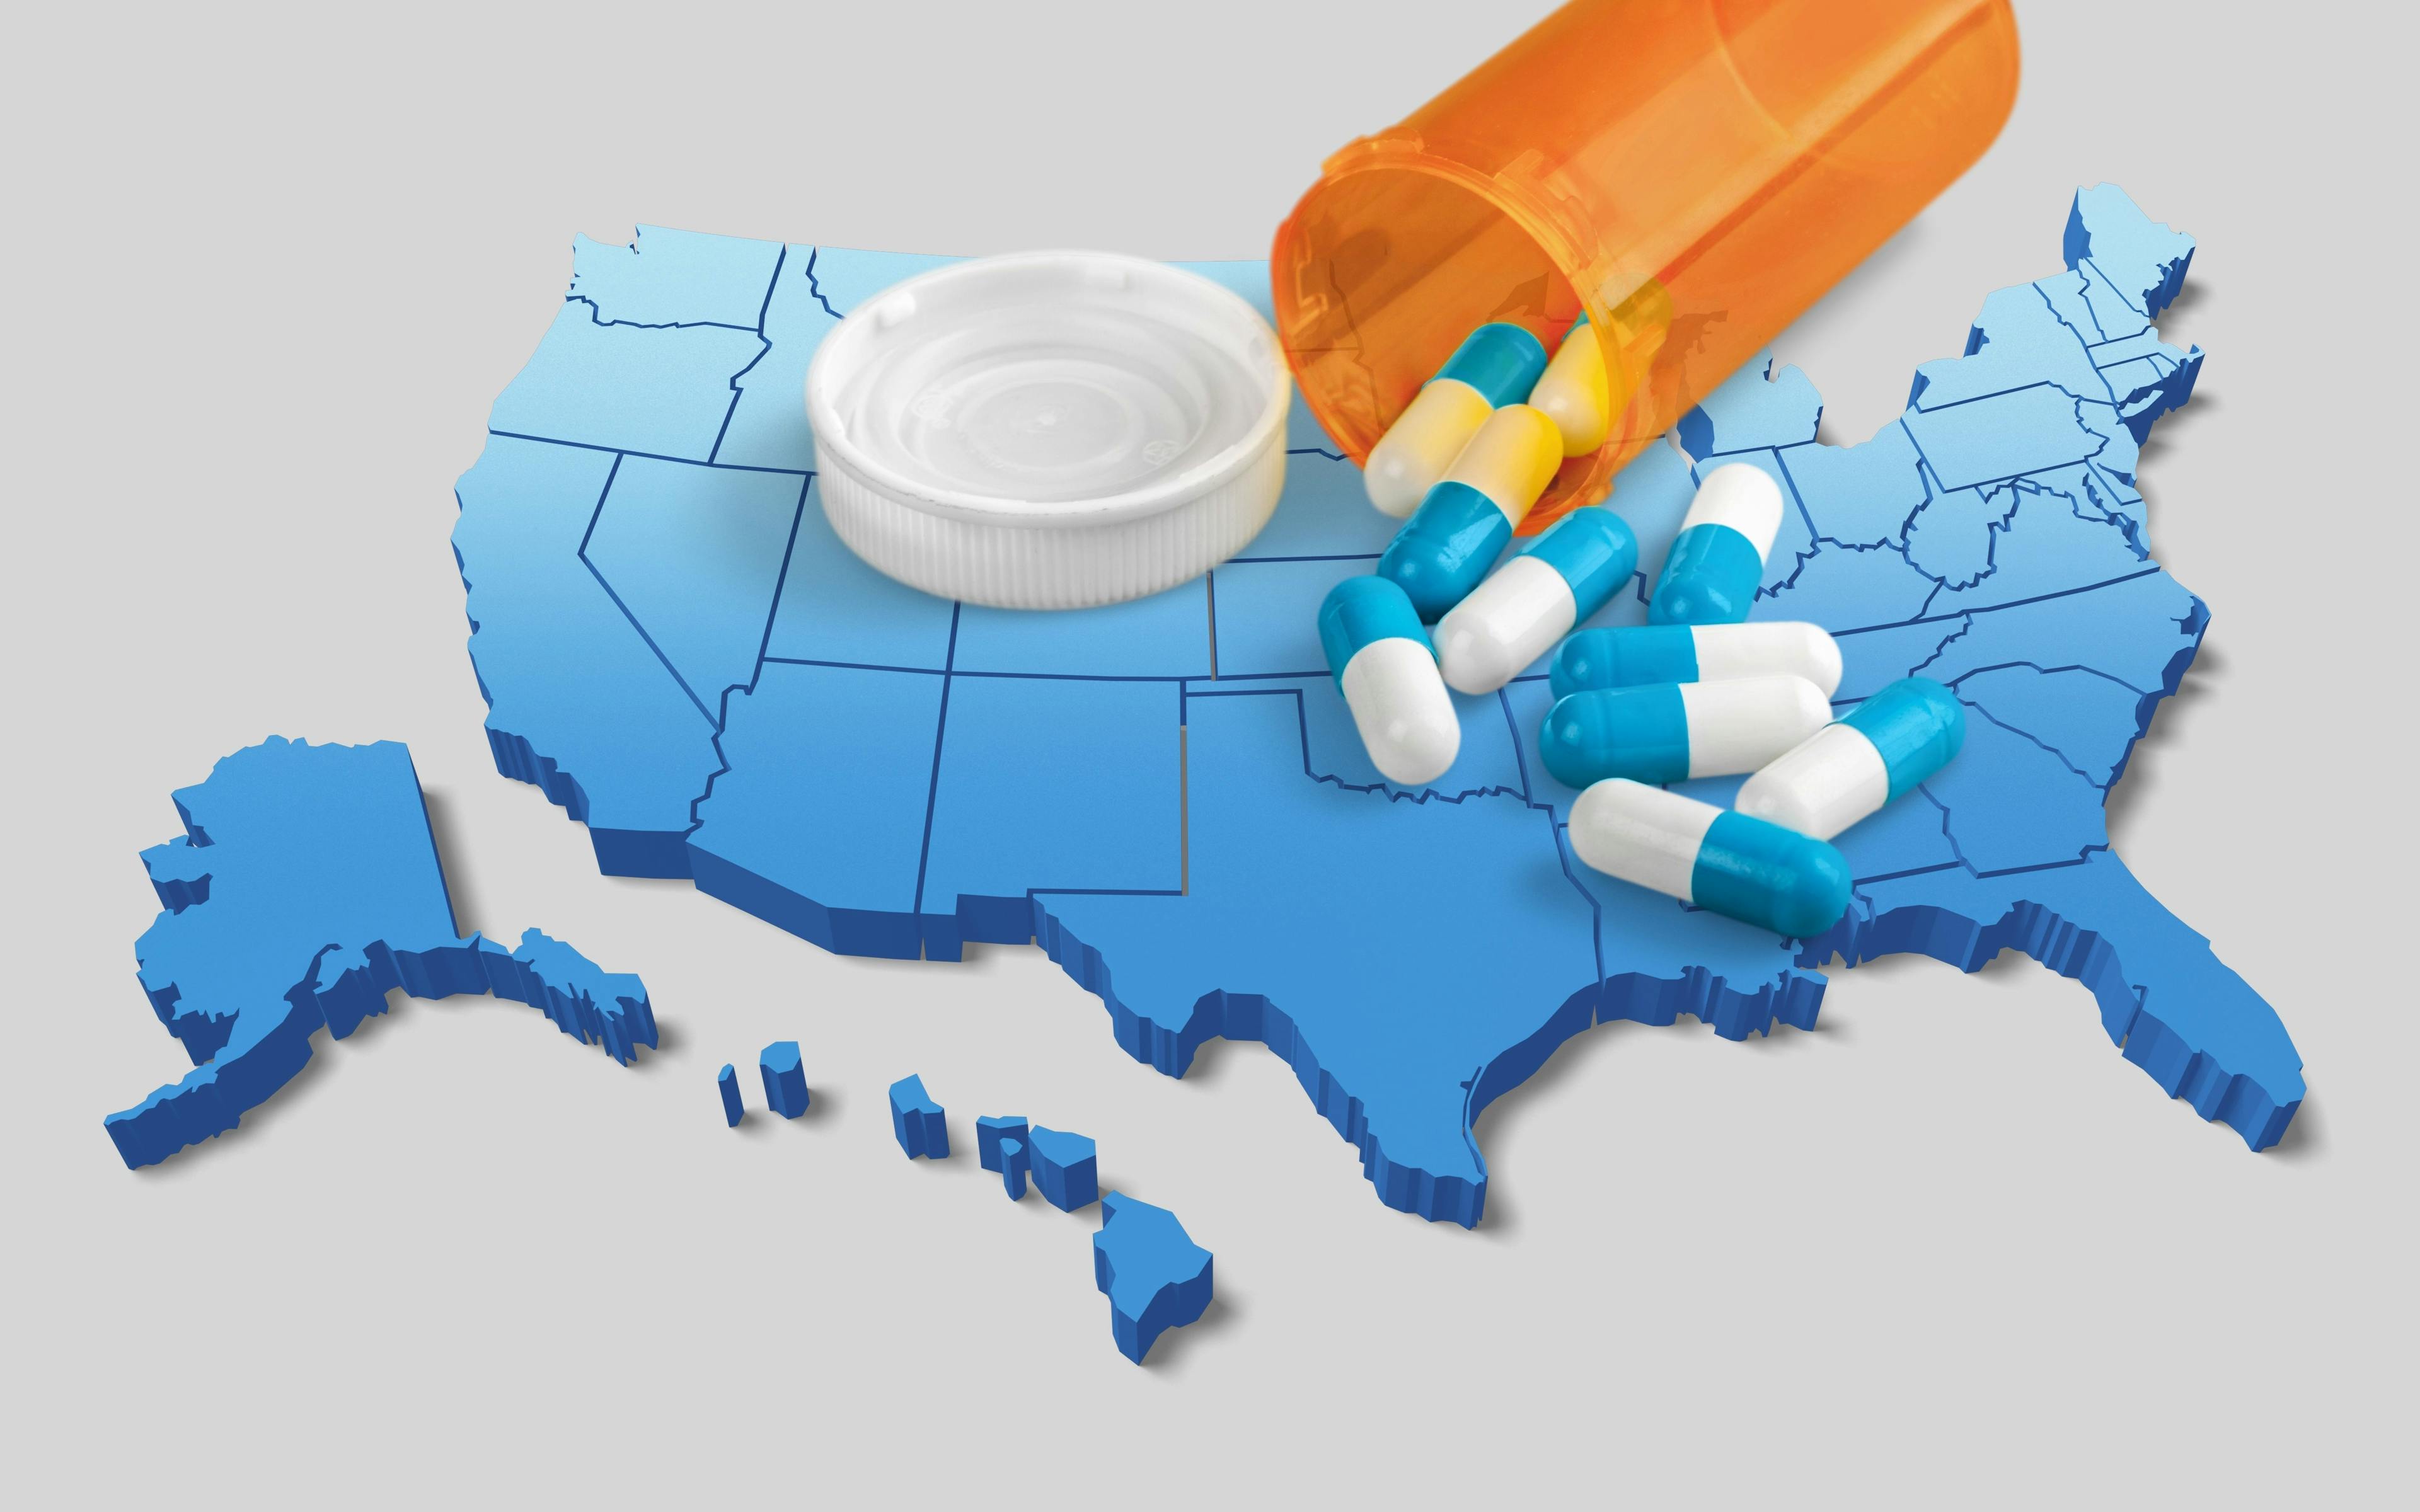 Opportunity Exists for Patient Education on Concurrent Opioid, Benzodiazepine Use